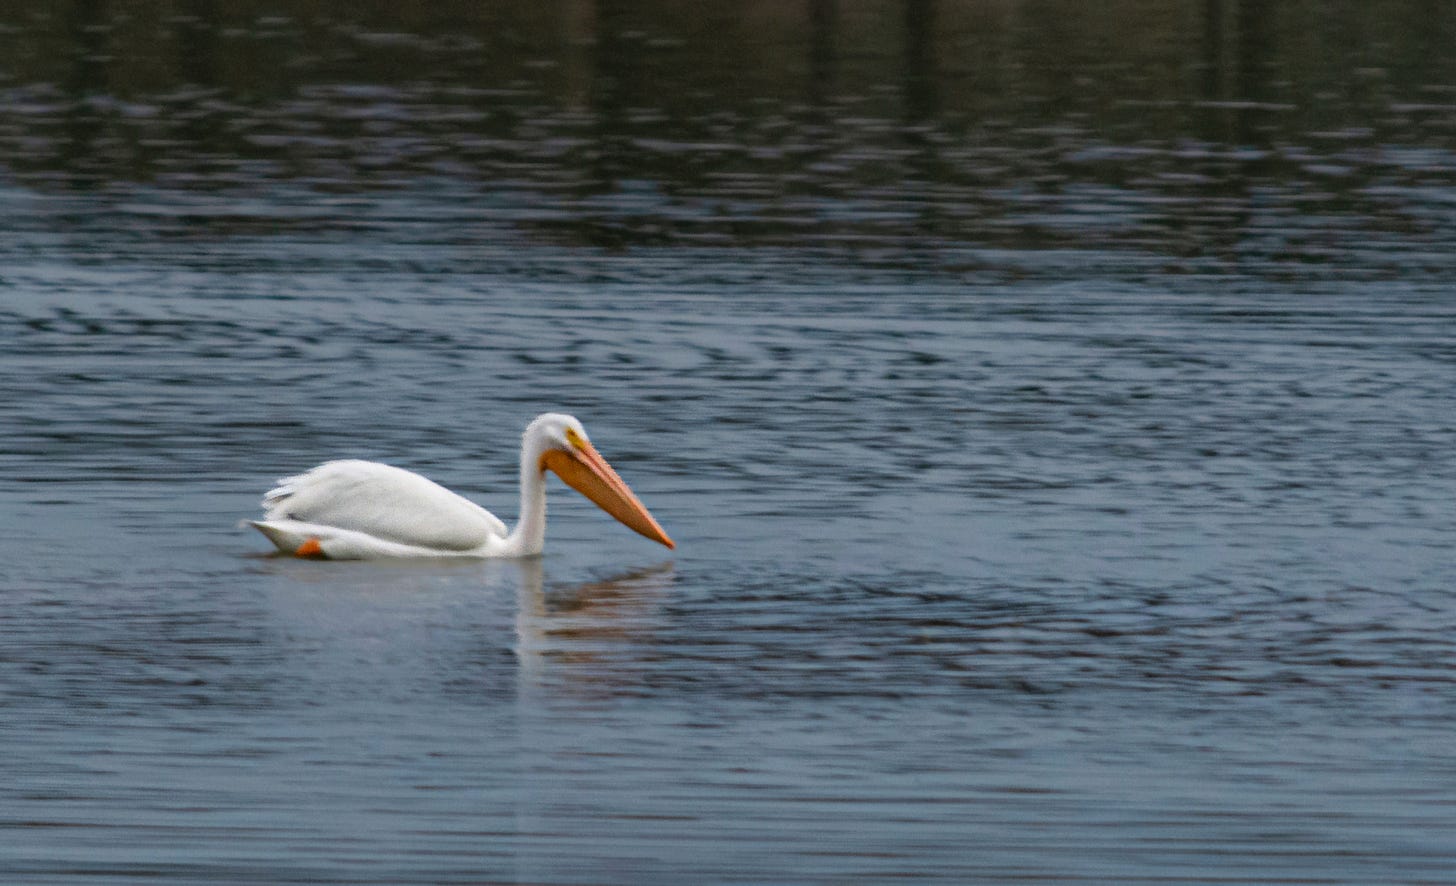 one white pelican swimming in a lake with the ripples of water surrounding it